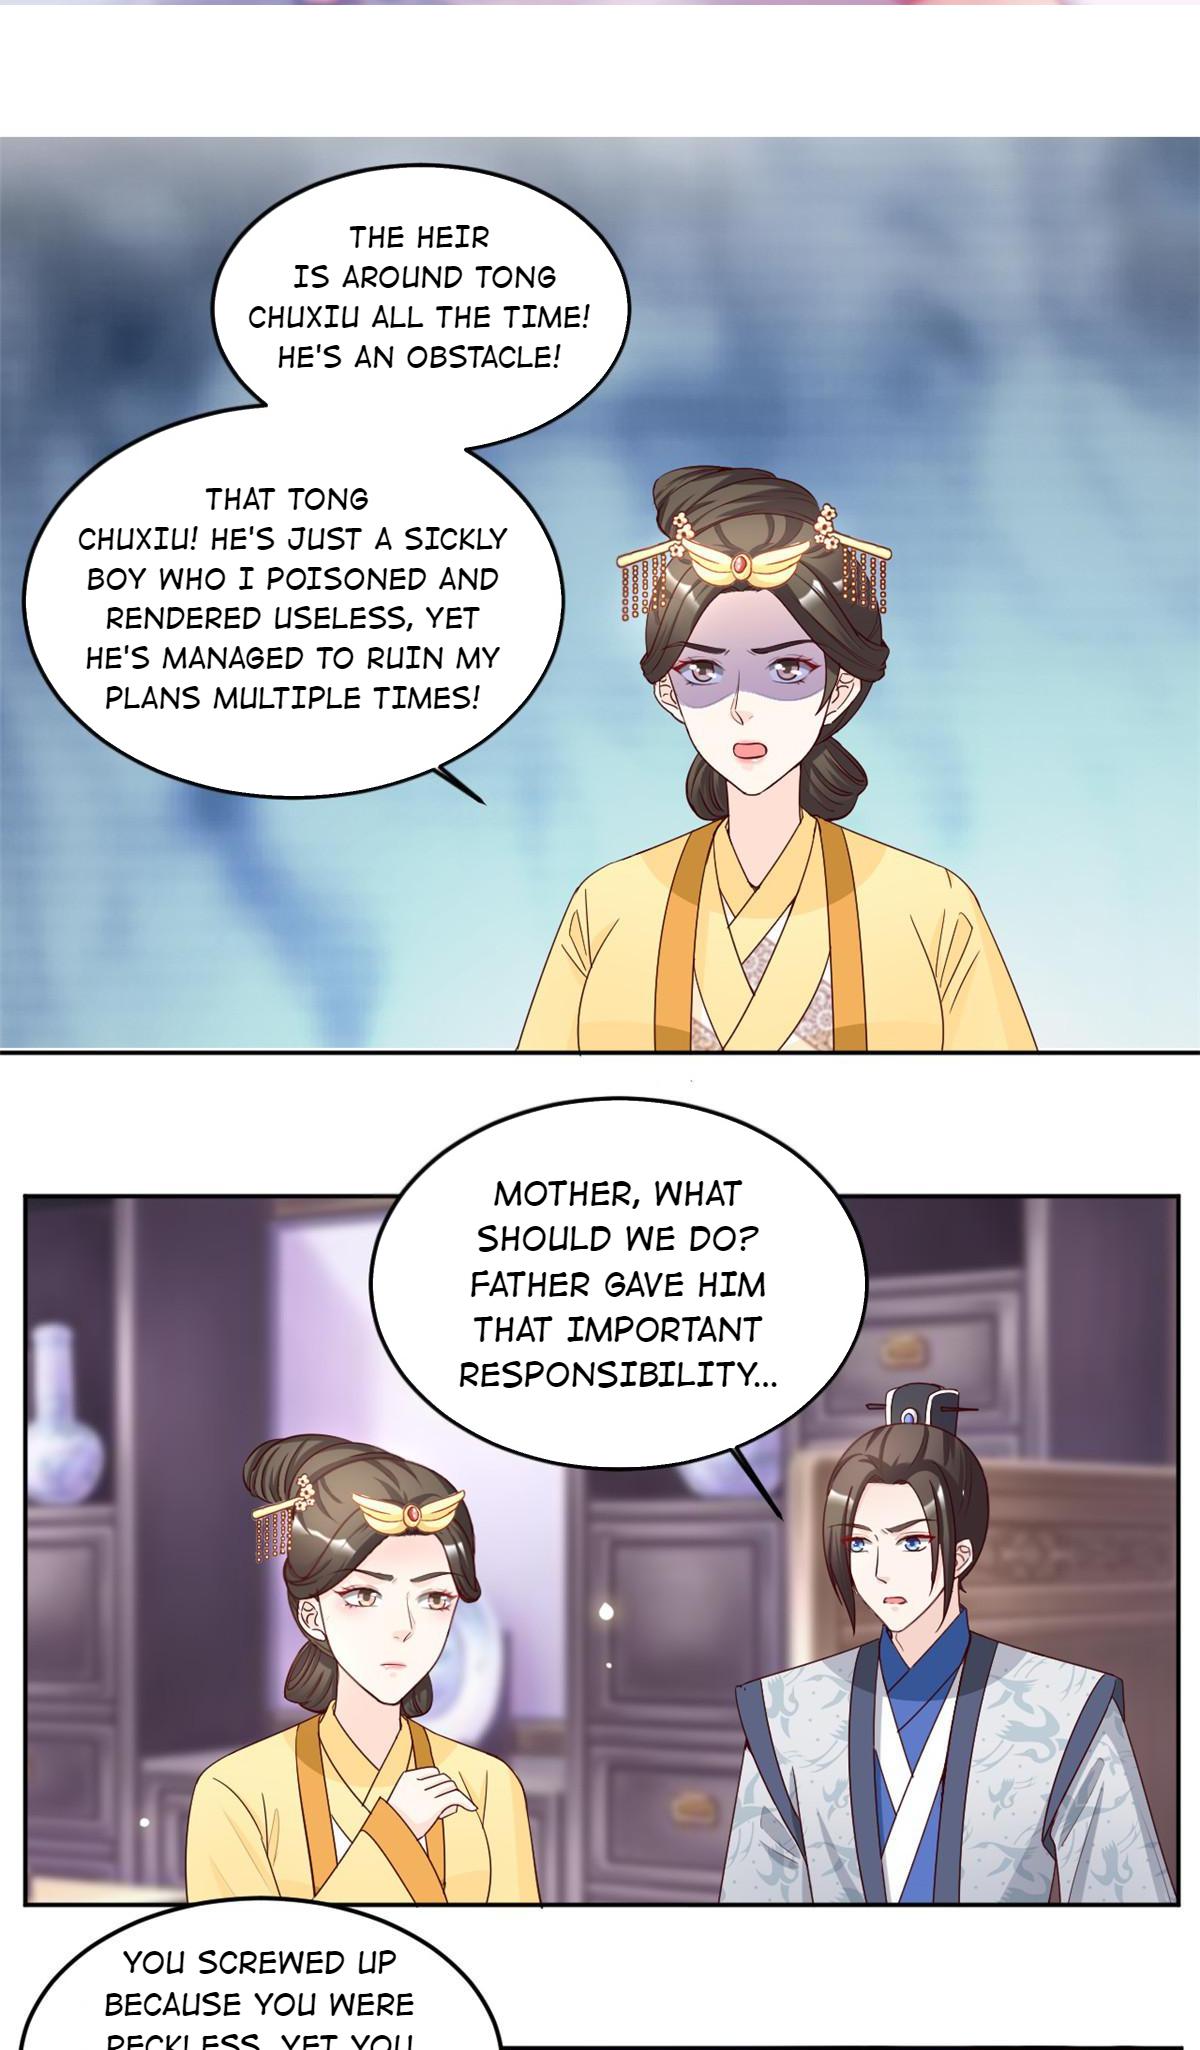 Imperial Splendor - Page 2